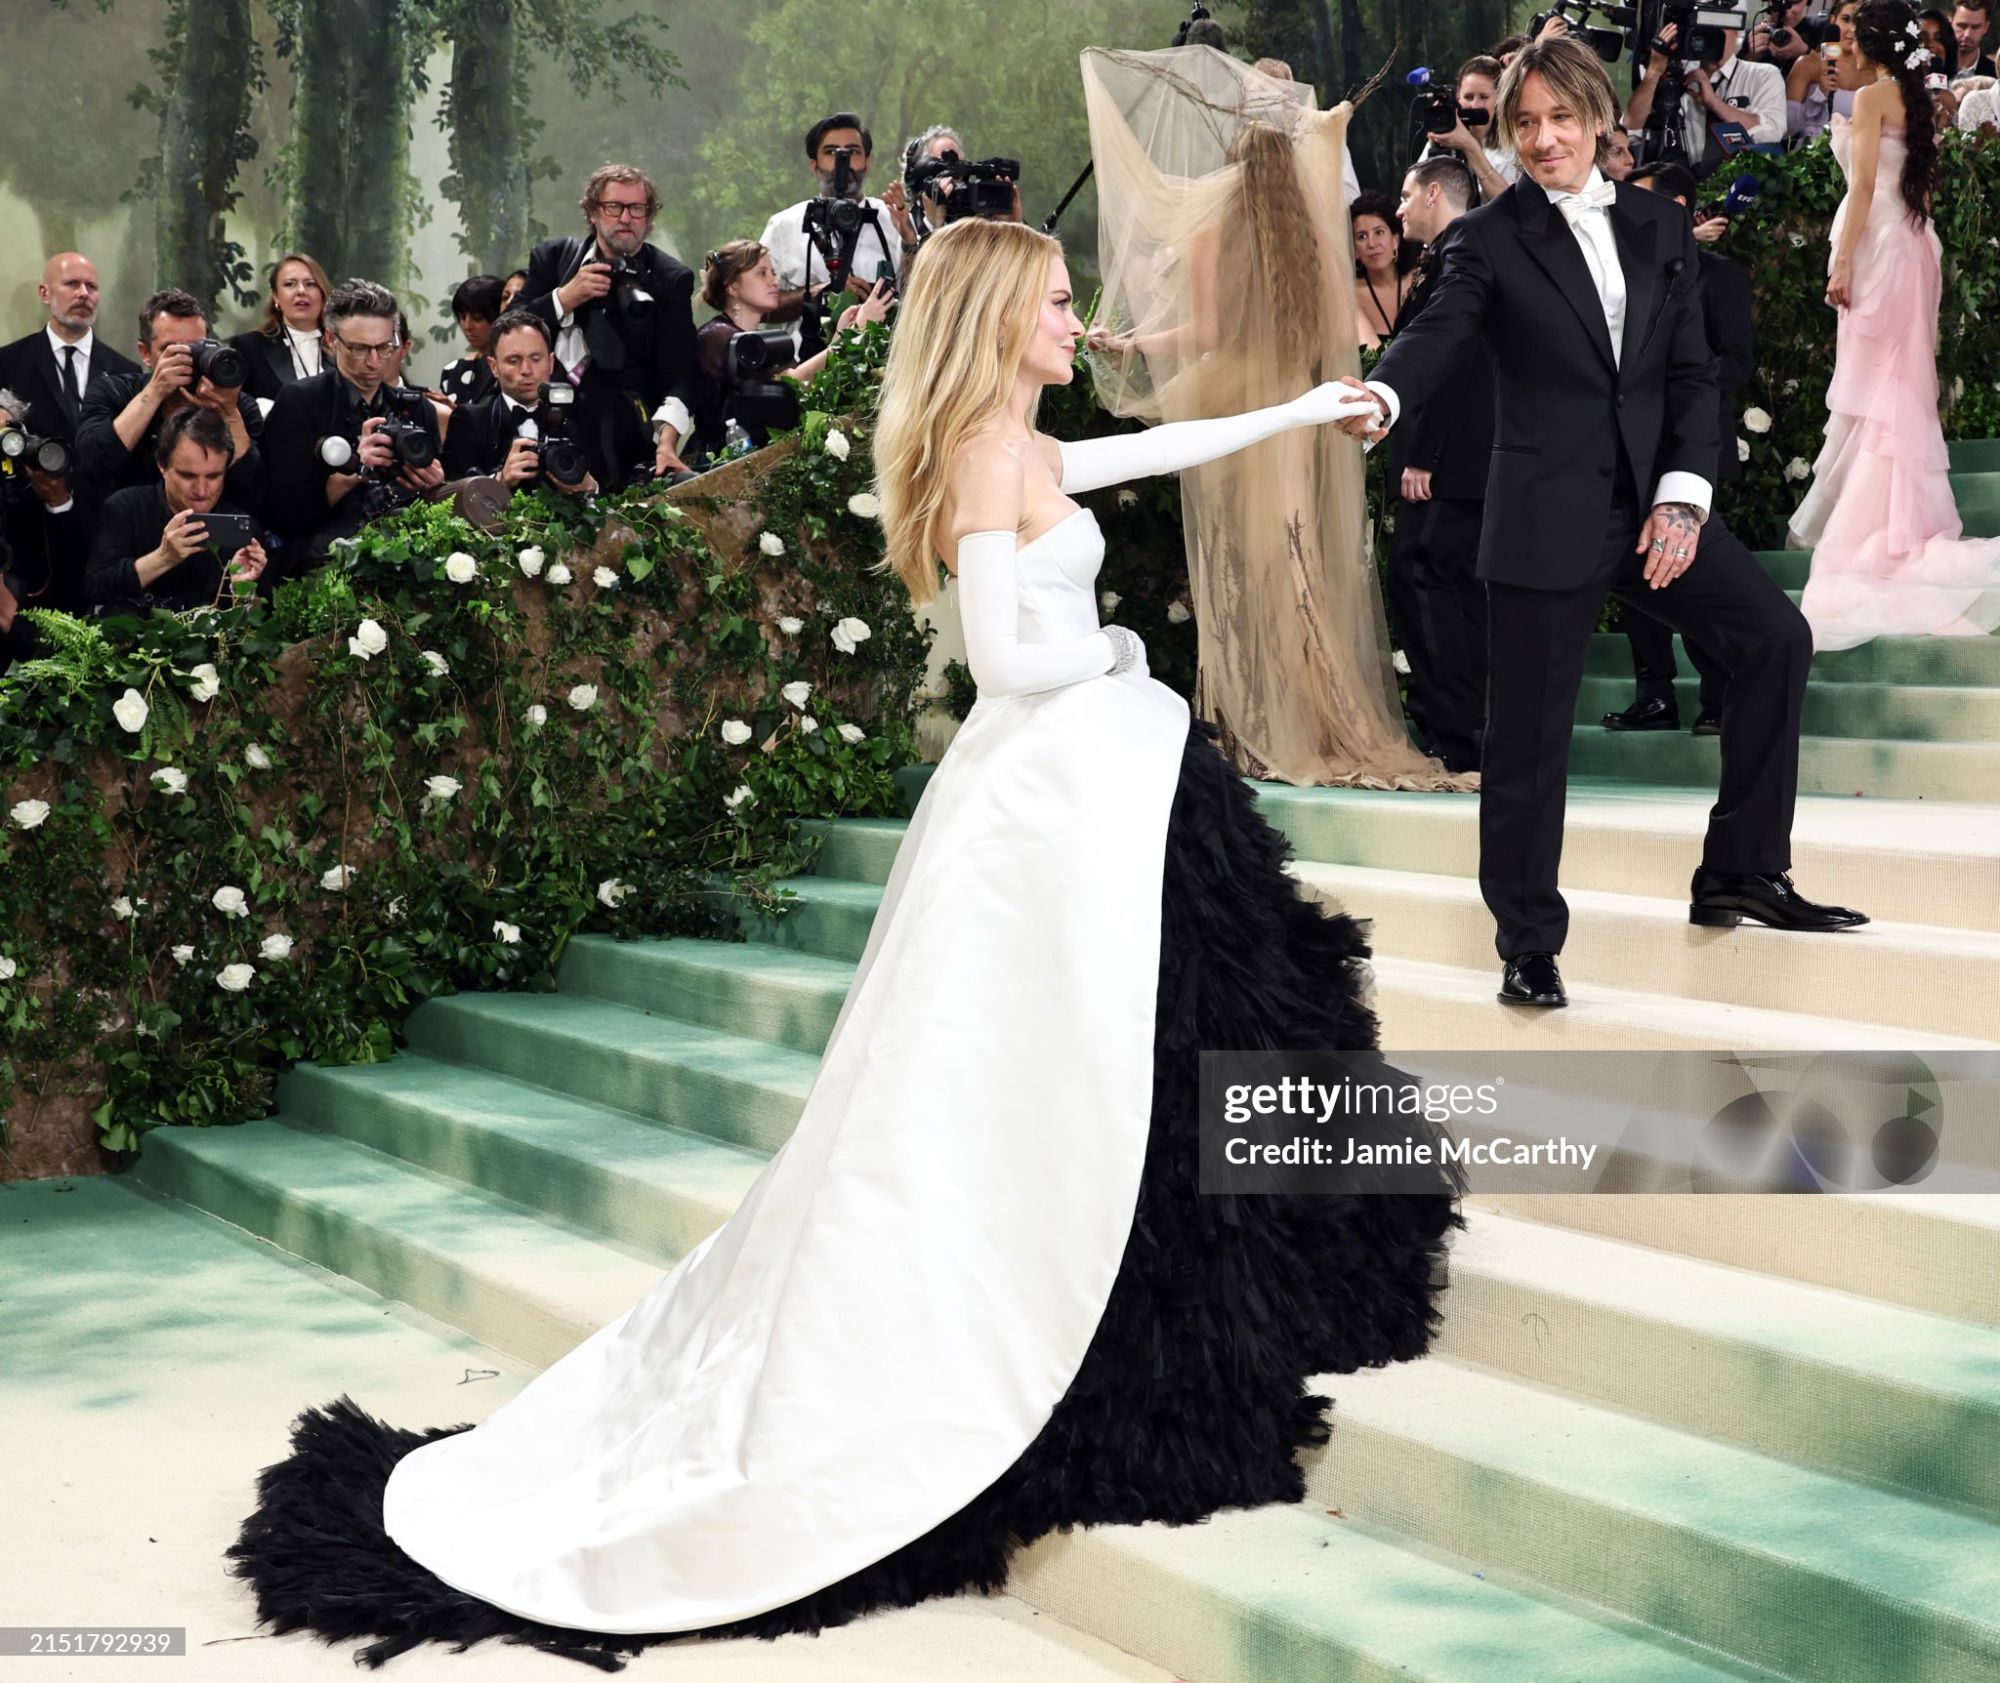 gettyimages-2151792939-2048x2048.jpg